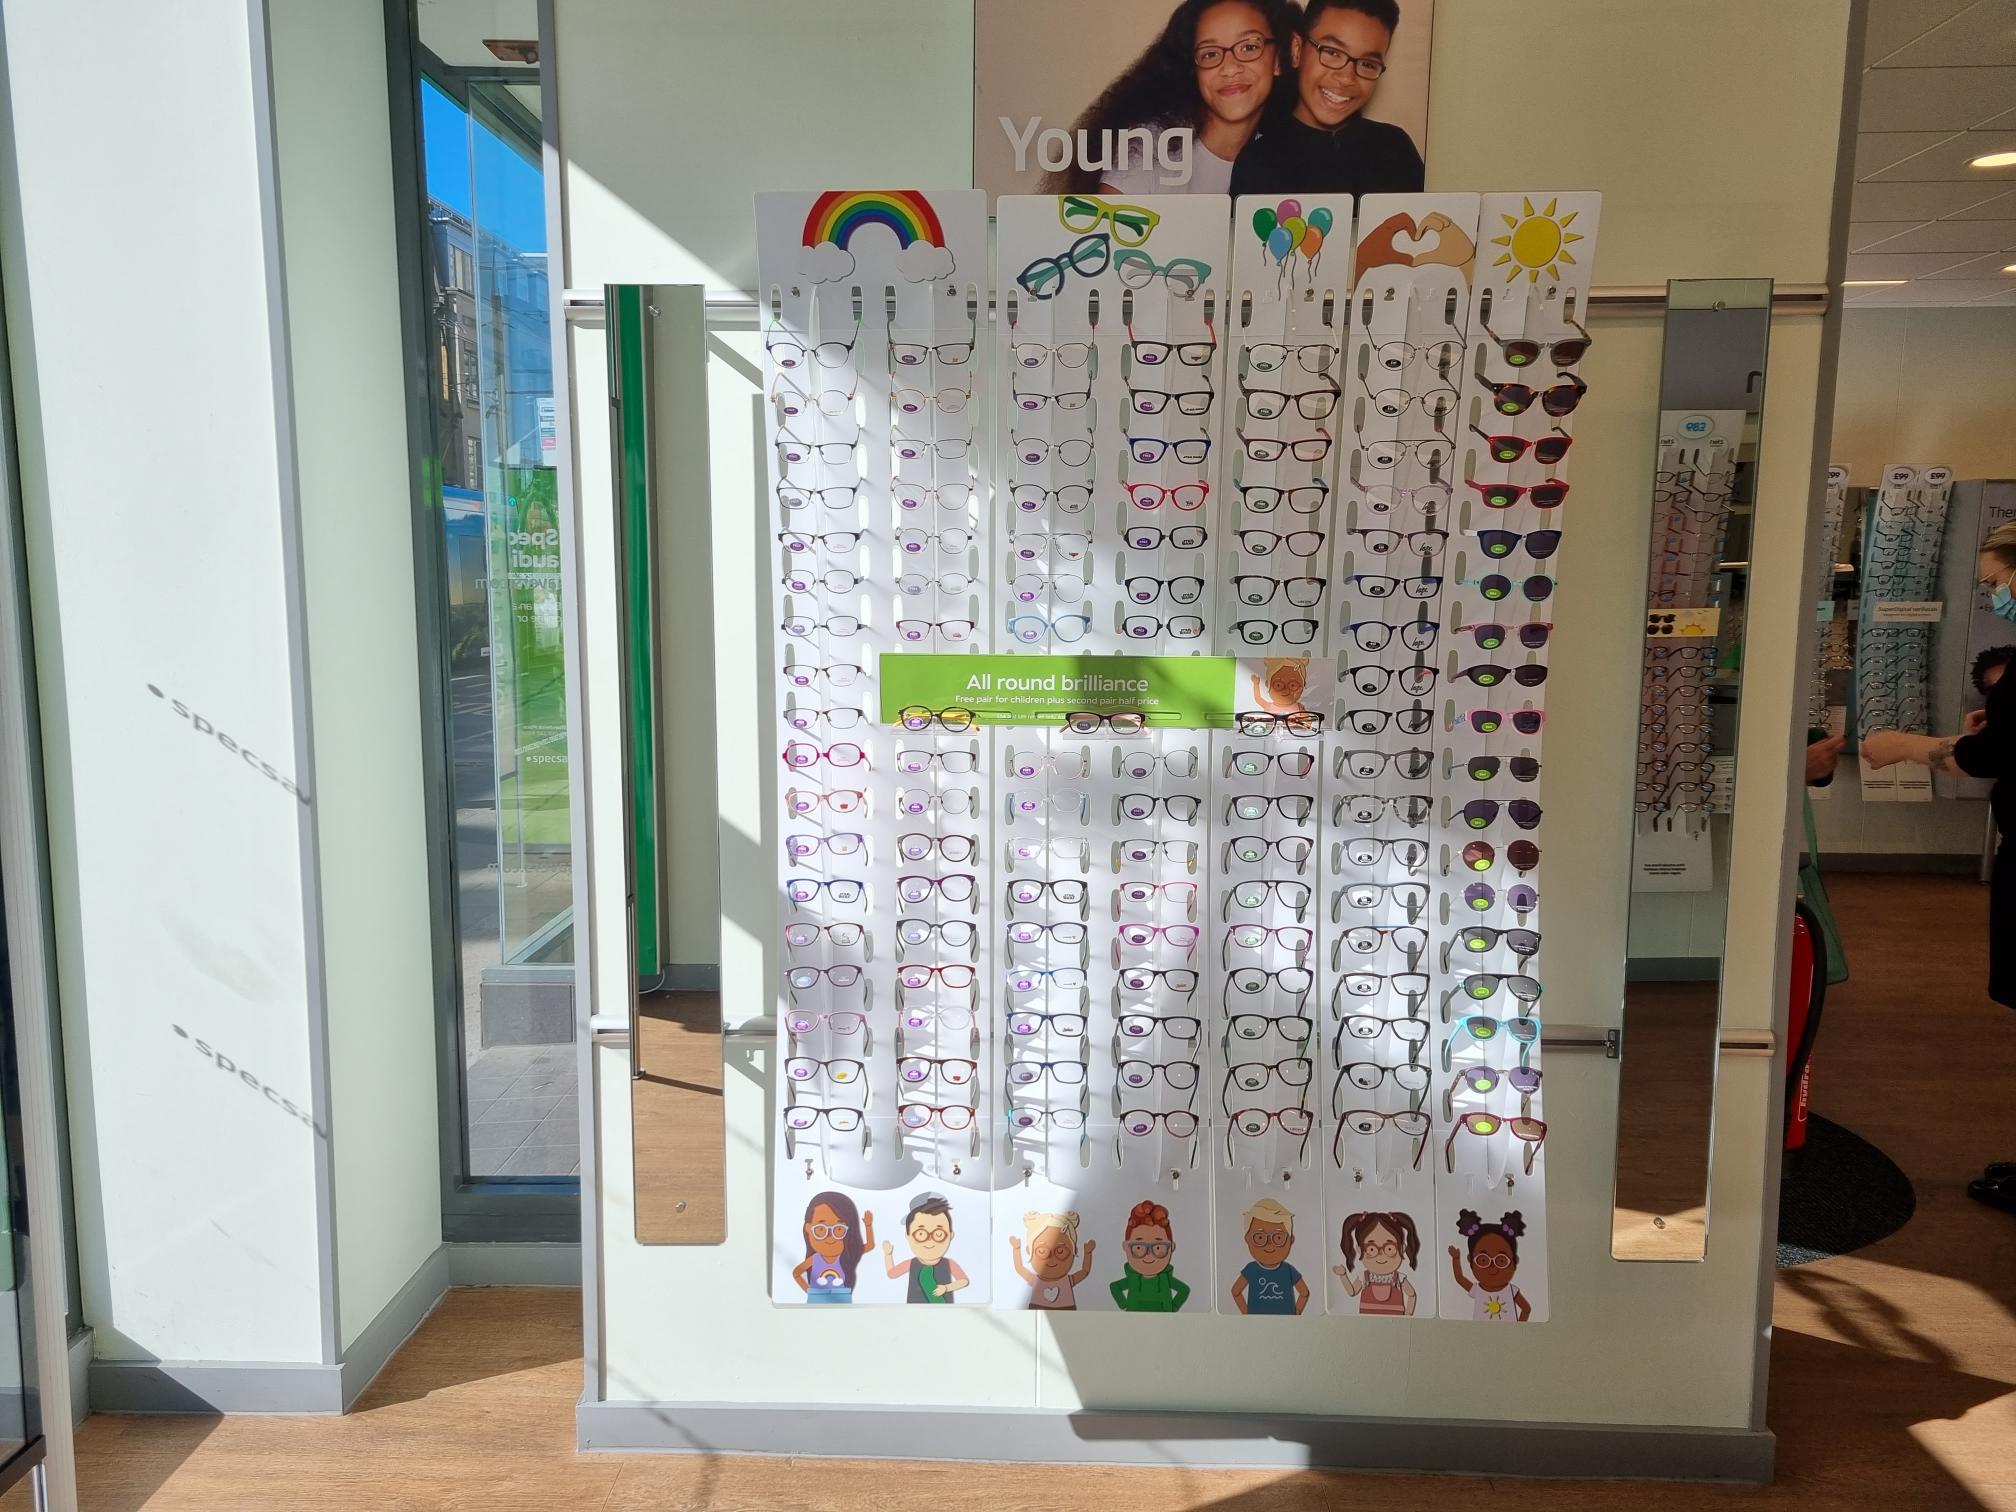 Images Specsavers Opticians and Audiologists - Shandwick Place